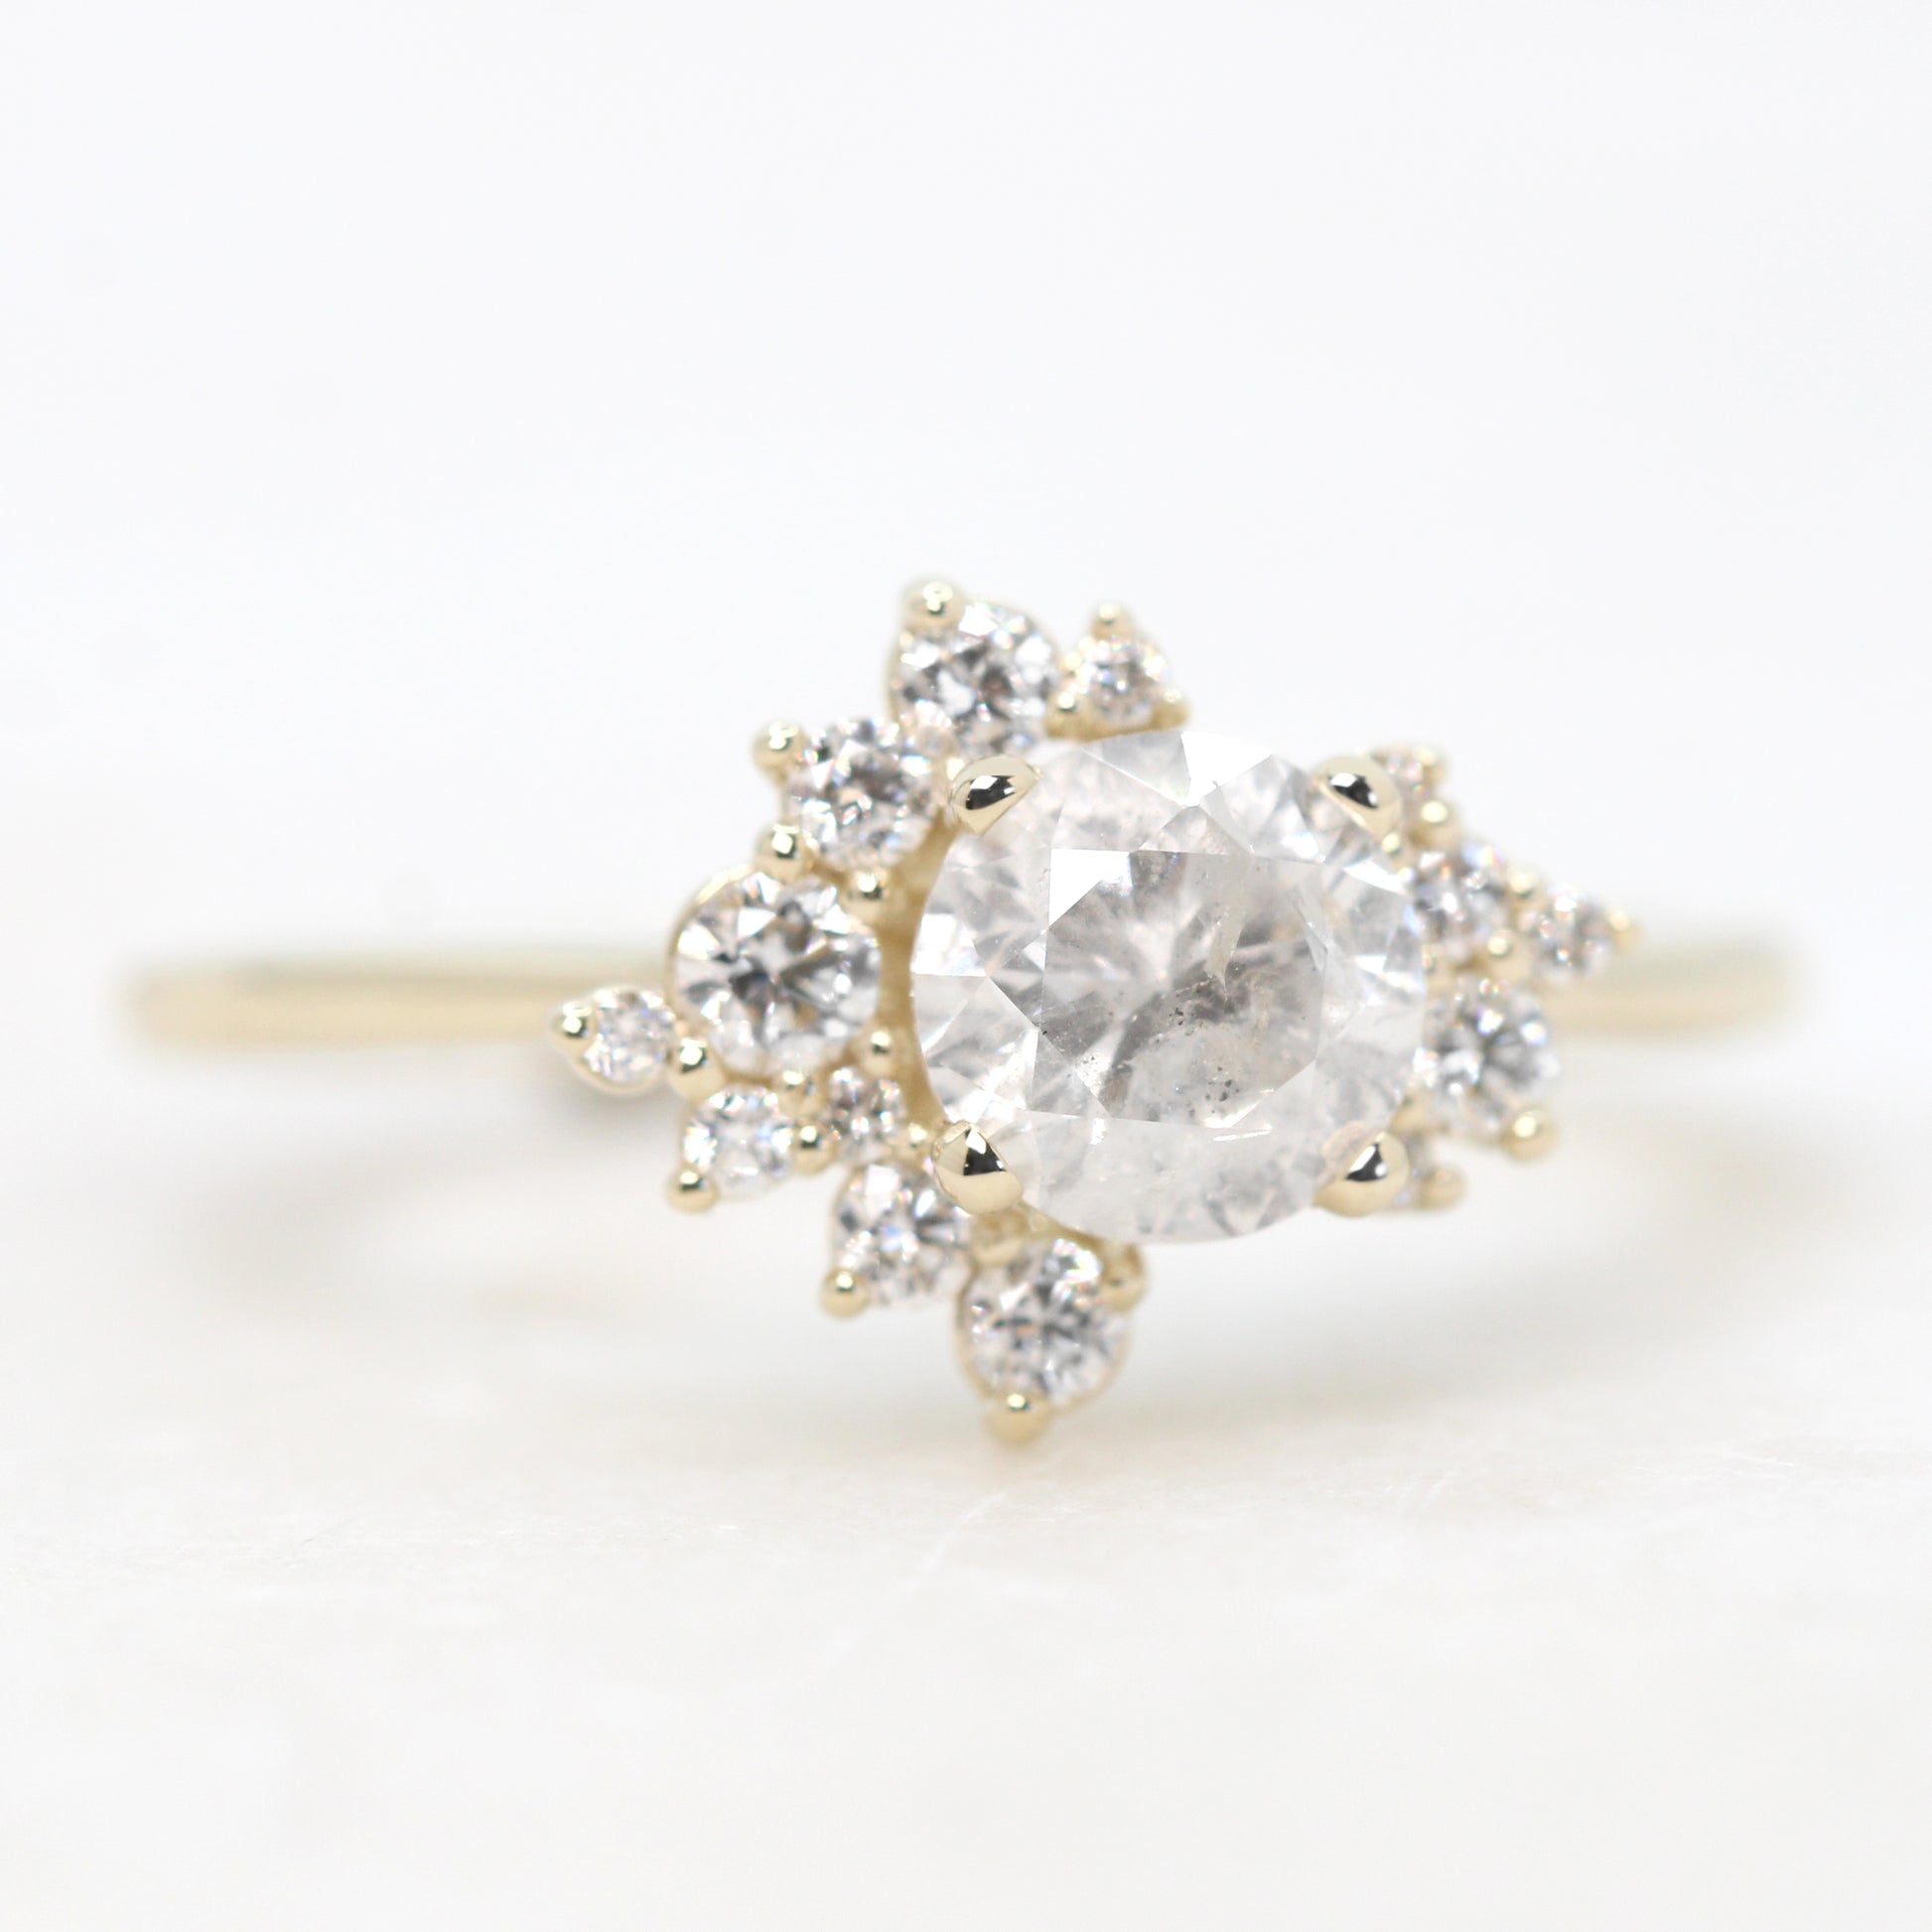 Orion Ring with a 1.00 Carat Round White Celestial Diamond and White Accent Diamonds in 14k Yellow Gold - Ready to Size and Ship - Midwinter Co. Alternative Bridal Rings and Modern Fine Jewelry